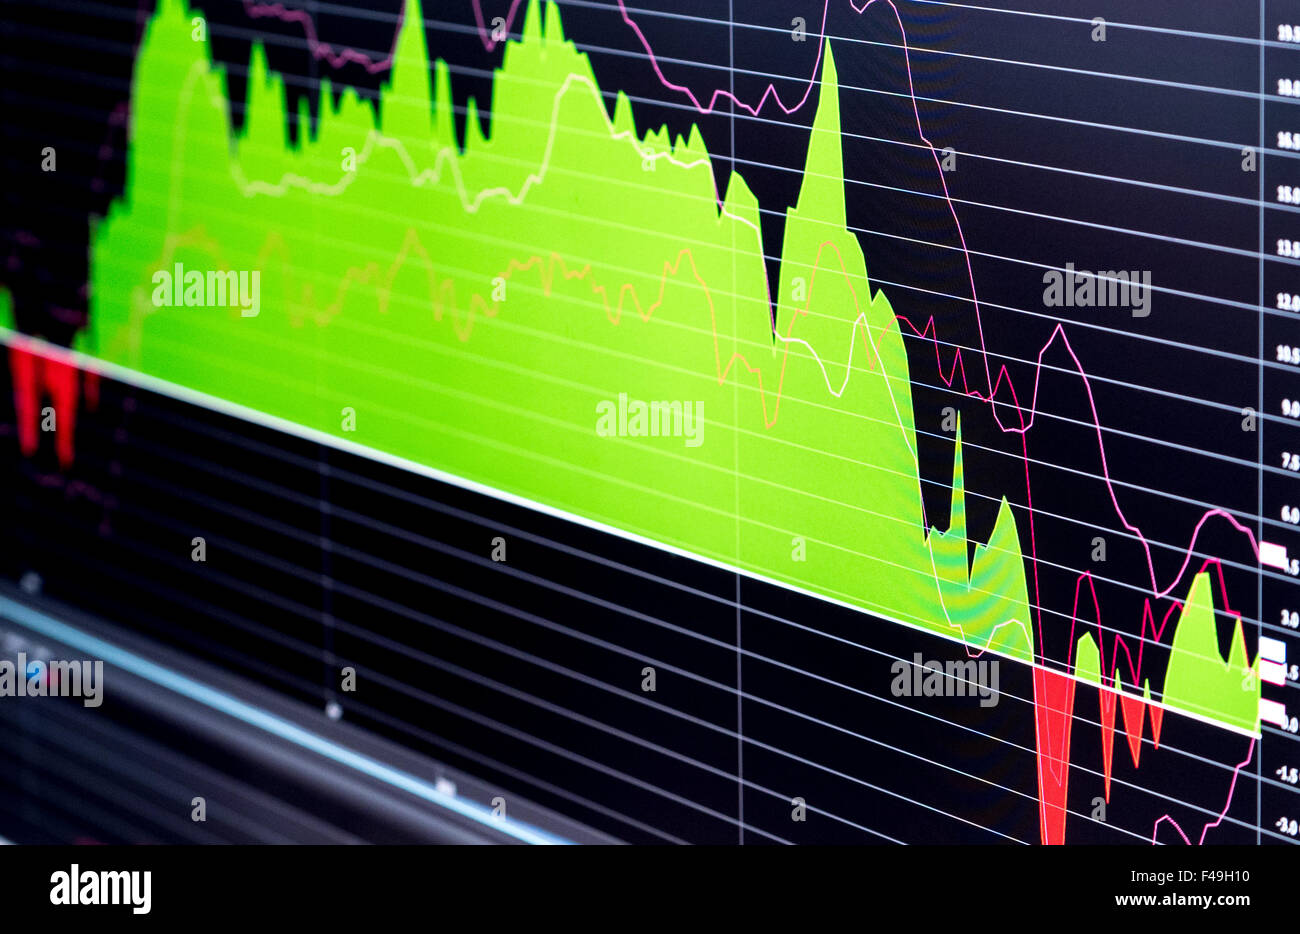 Economic chart on computer monitor, technical analysis of financial instrument with averages, green and red indicators. Stock Photo